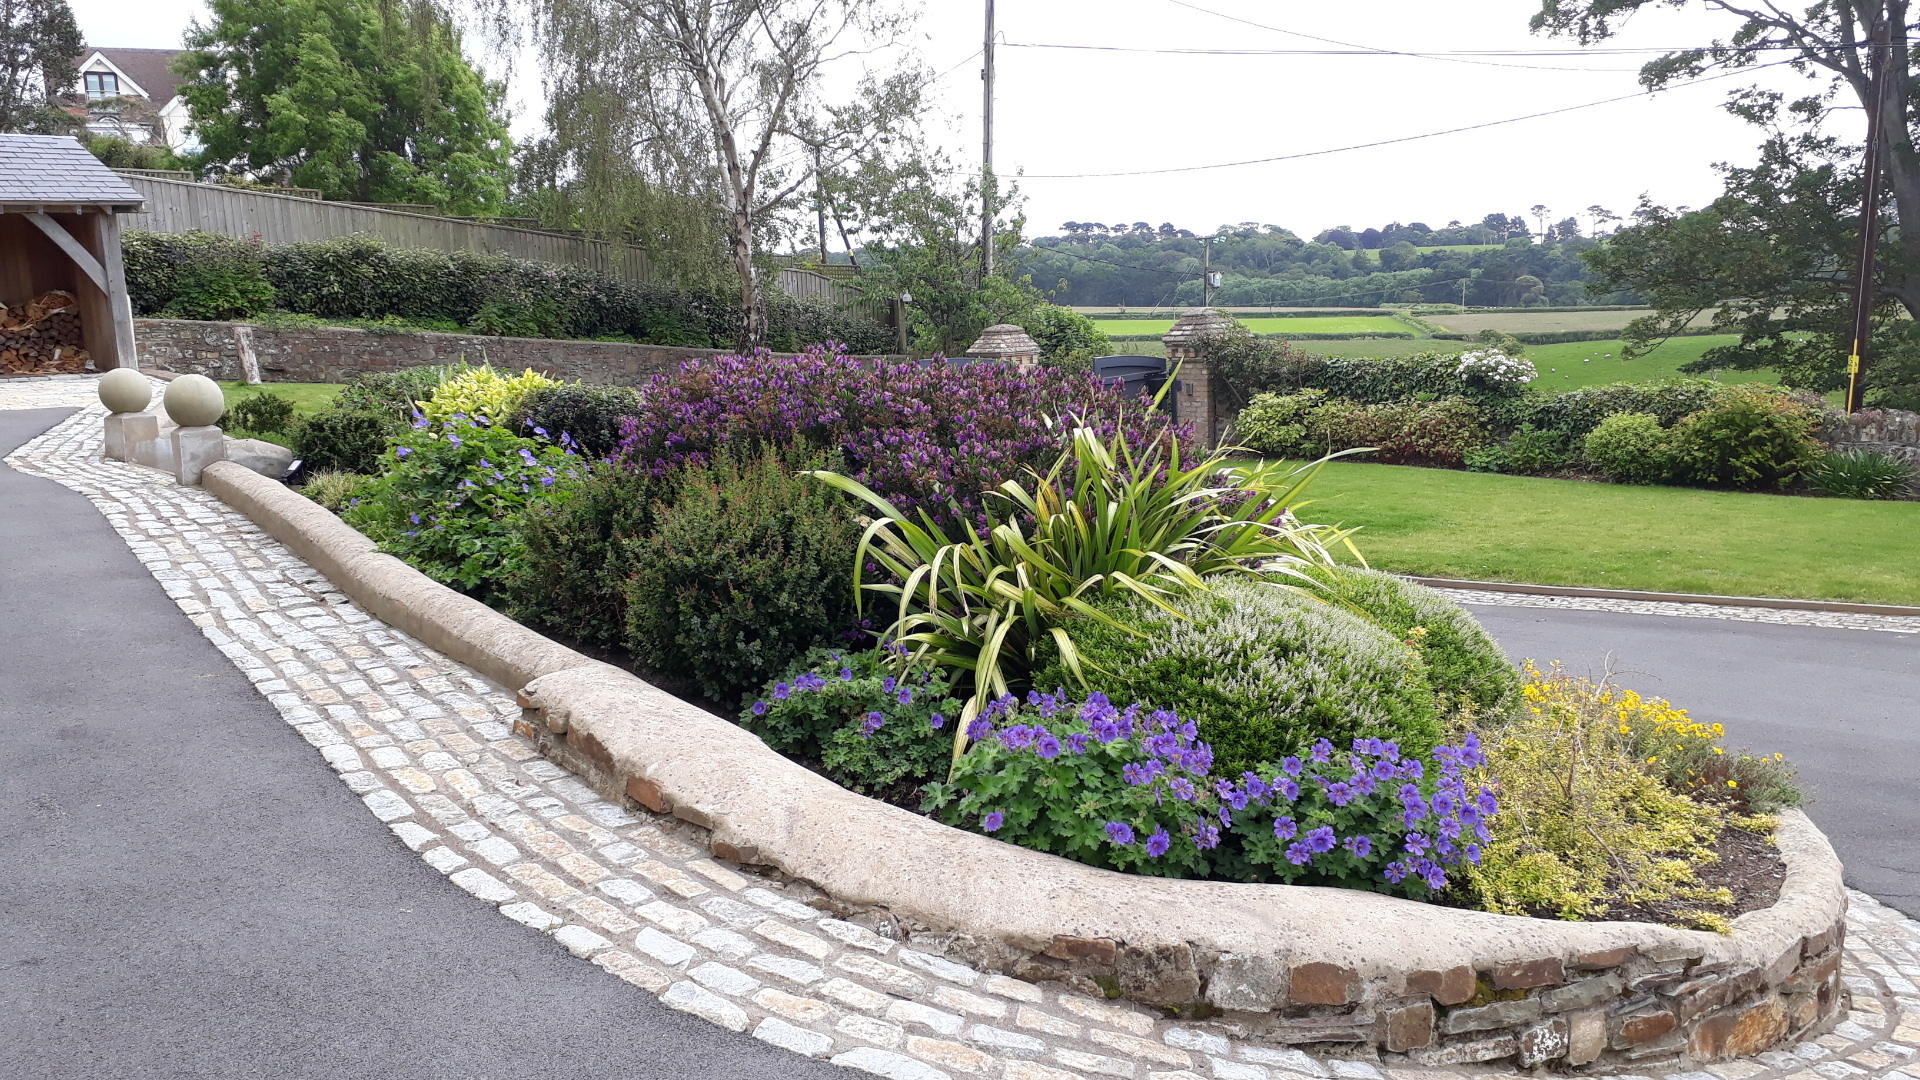 Alison Bockh Garden Design and Landscaping - North Devon - Front entrance and drive now complete